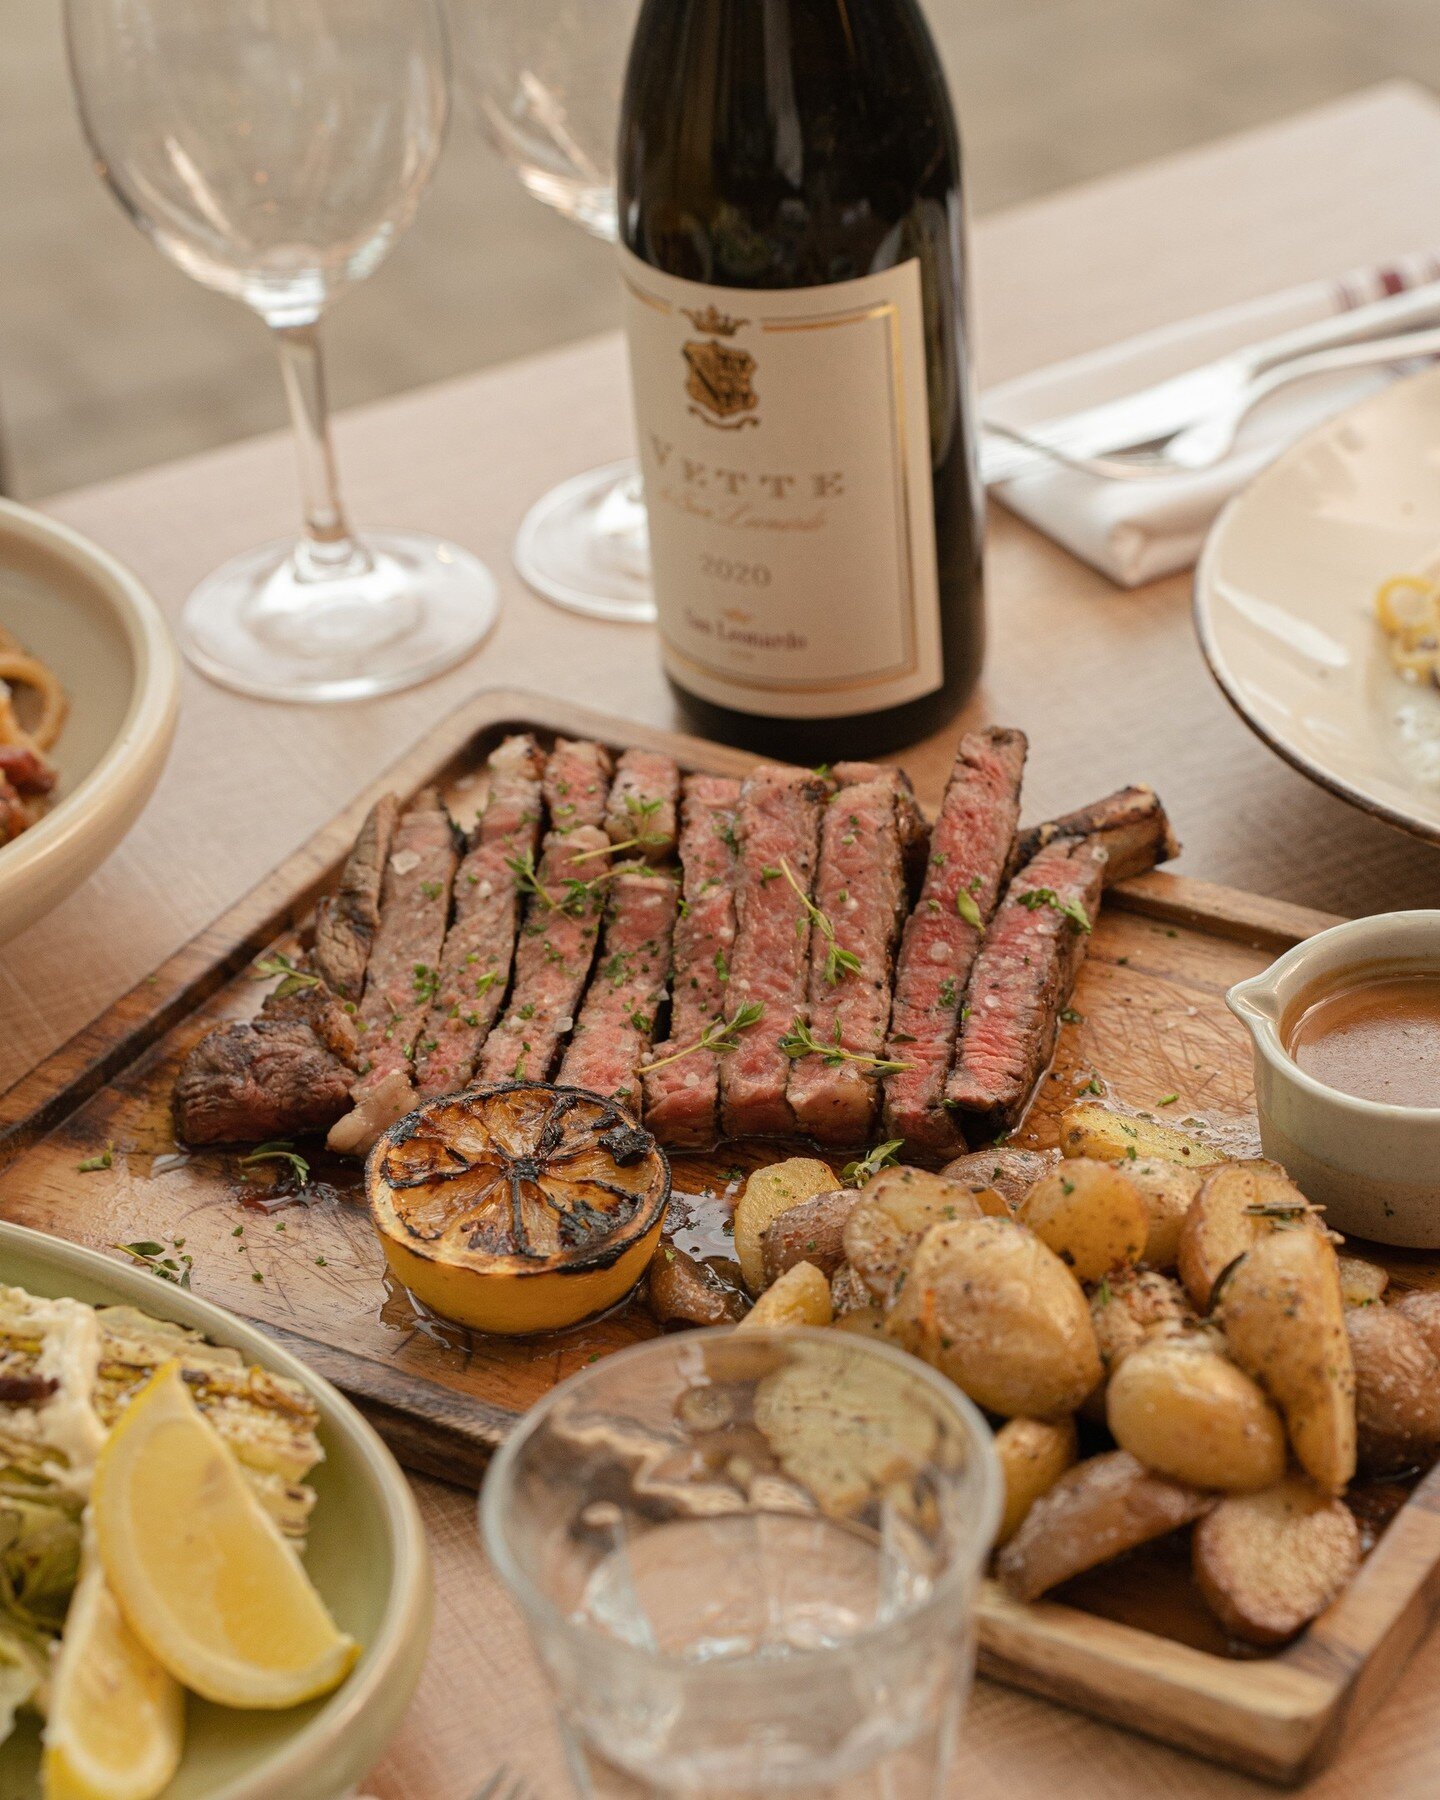 A combo that&rsquo;s meant to be savoured. 

Steak, potatoes, and wine. 

A recipe for relaxation. Buon Appetito!